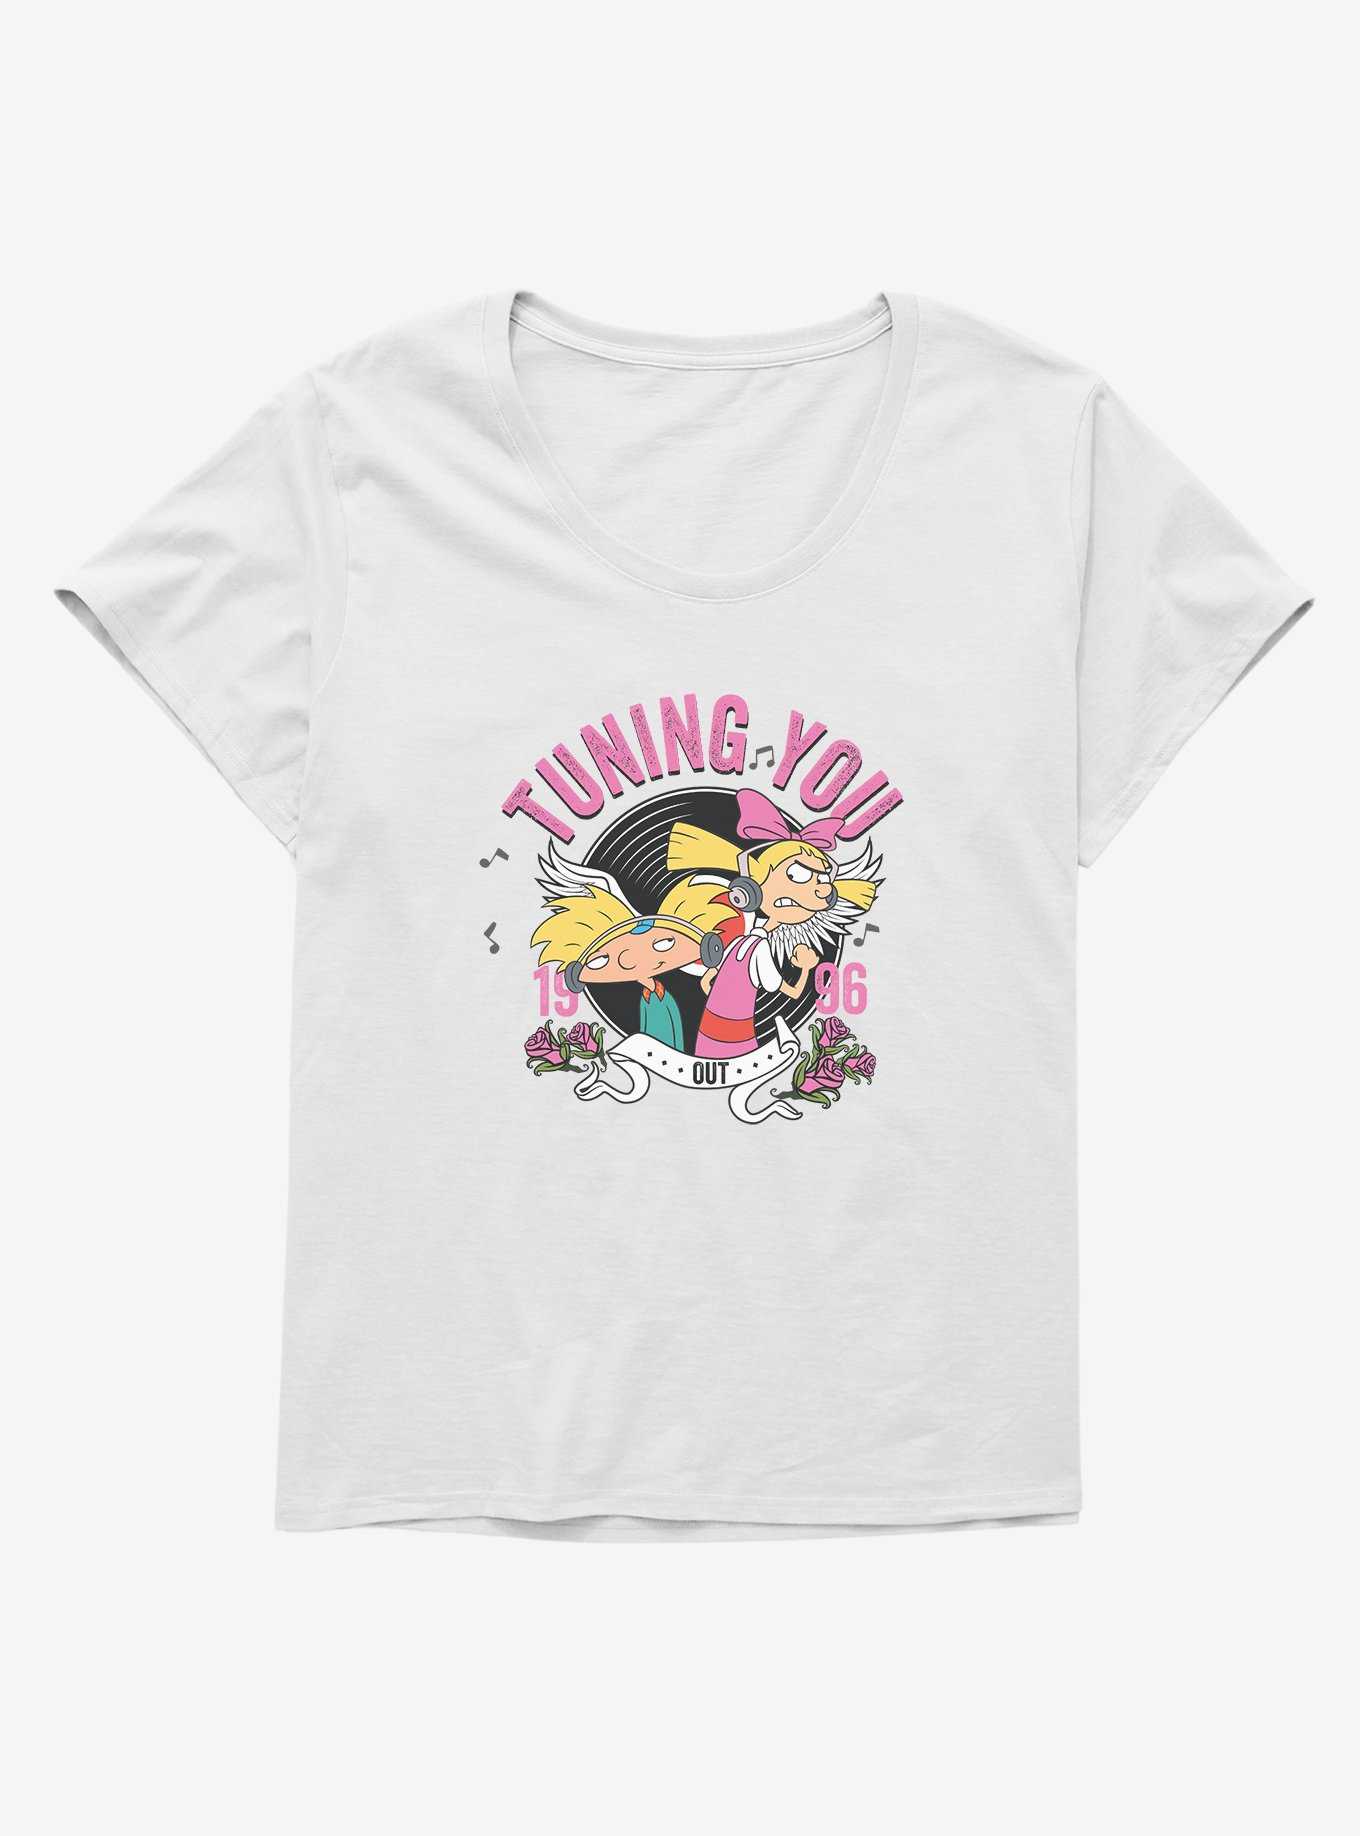 Hey Arnold! Tuning You Out 1996 Girls T-Shirt Plus Size, , hi-res